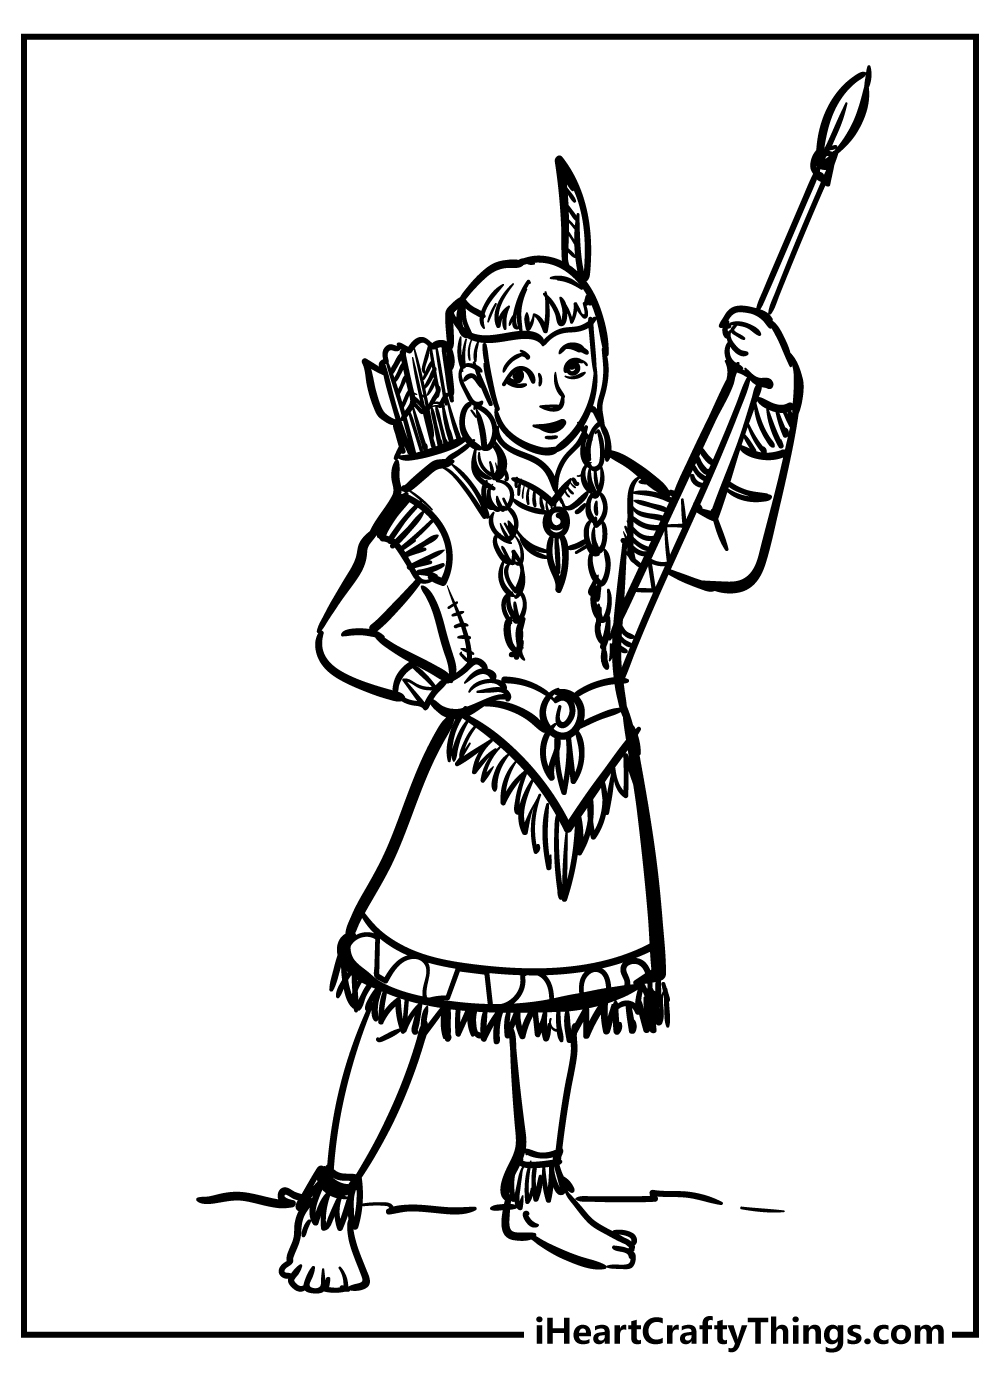 Native American Coloring Pages for preschoolers free printable